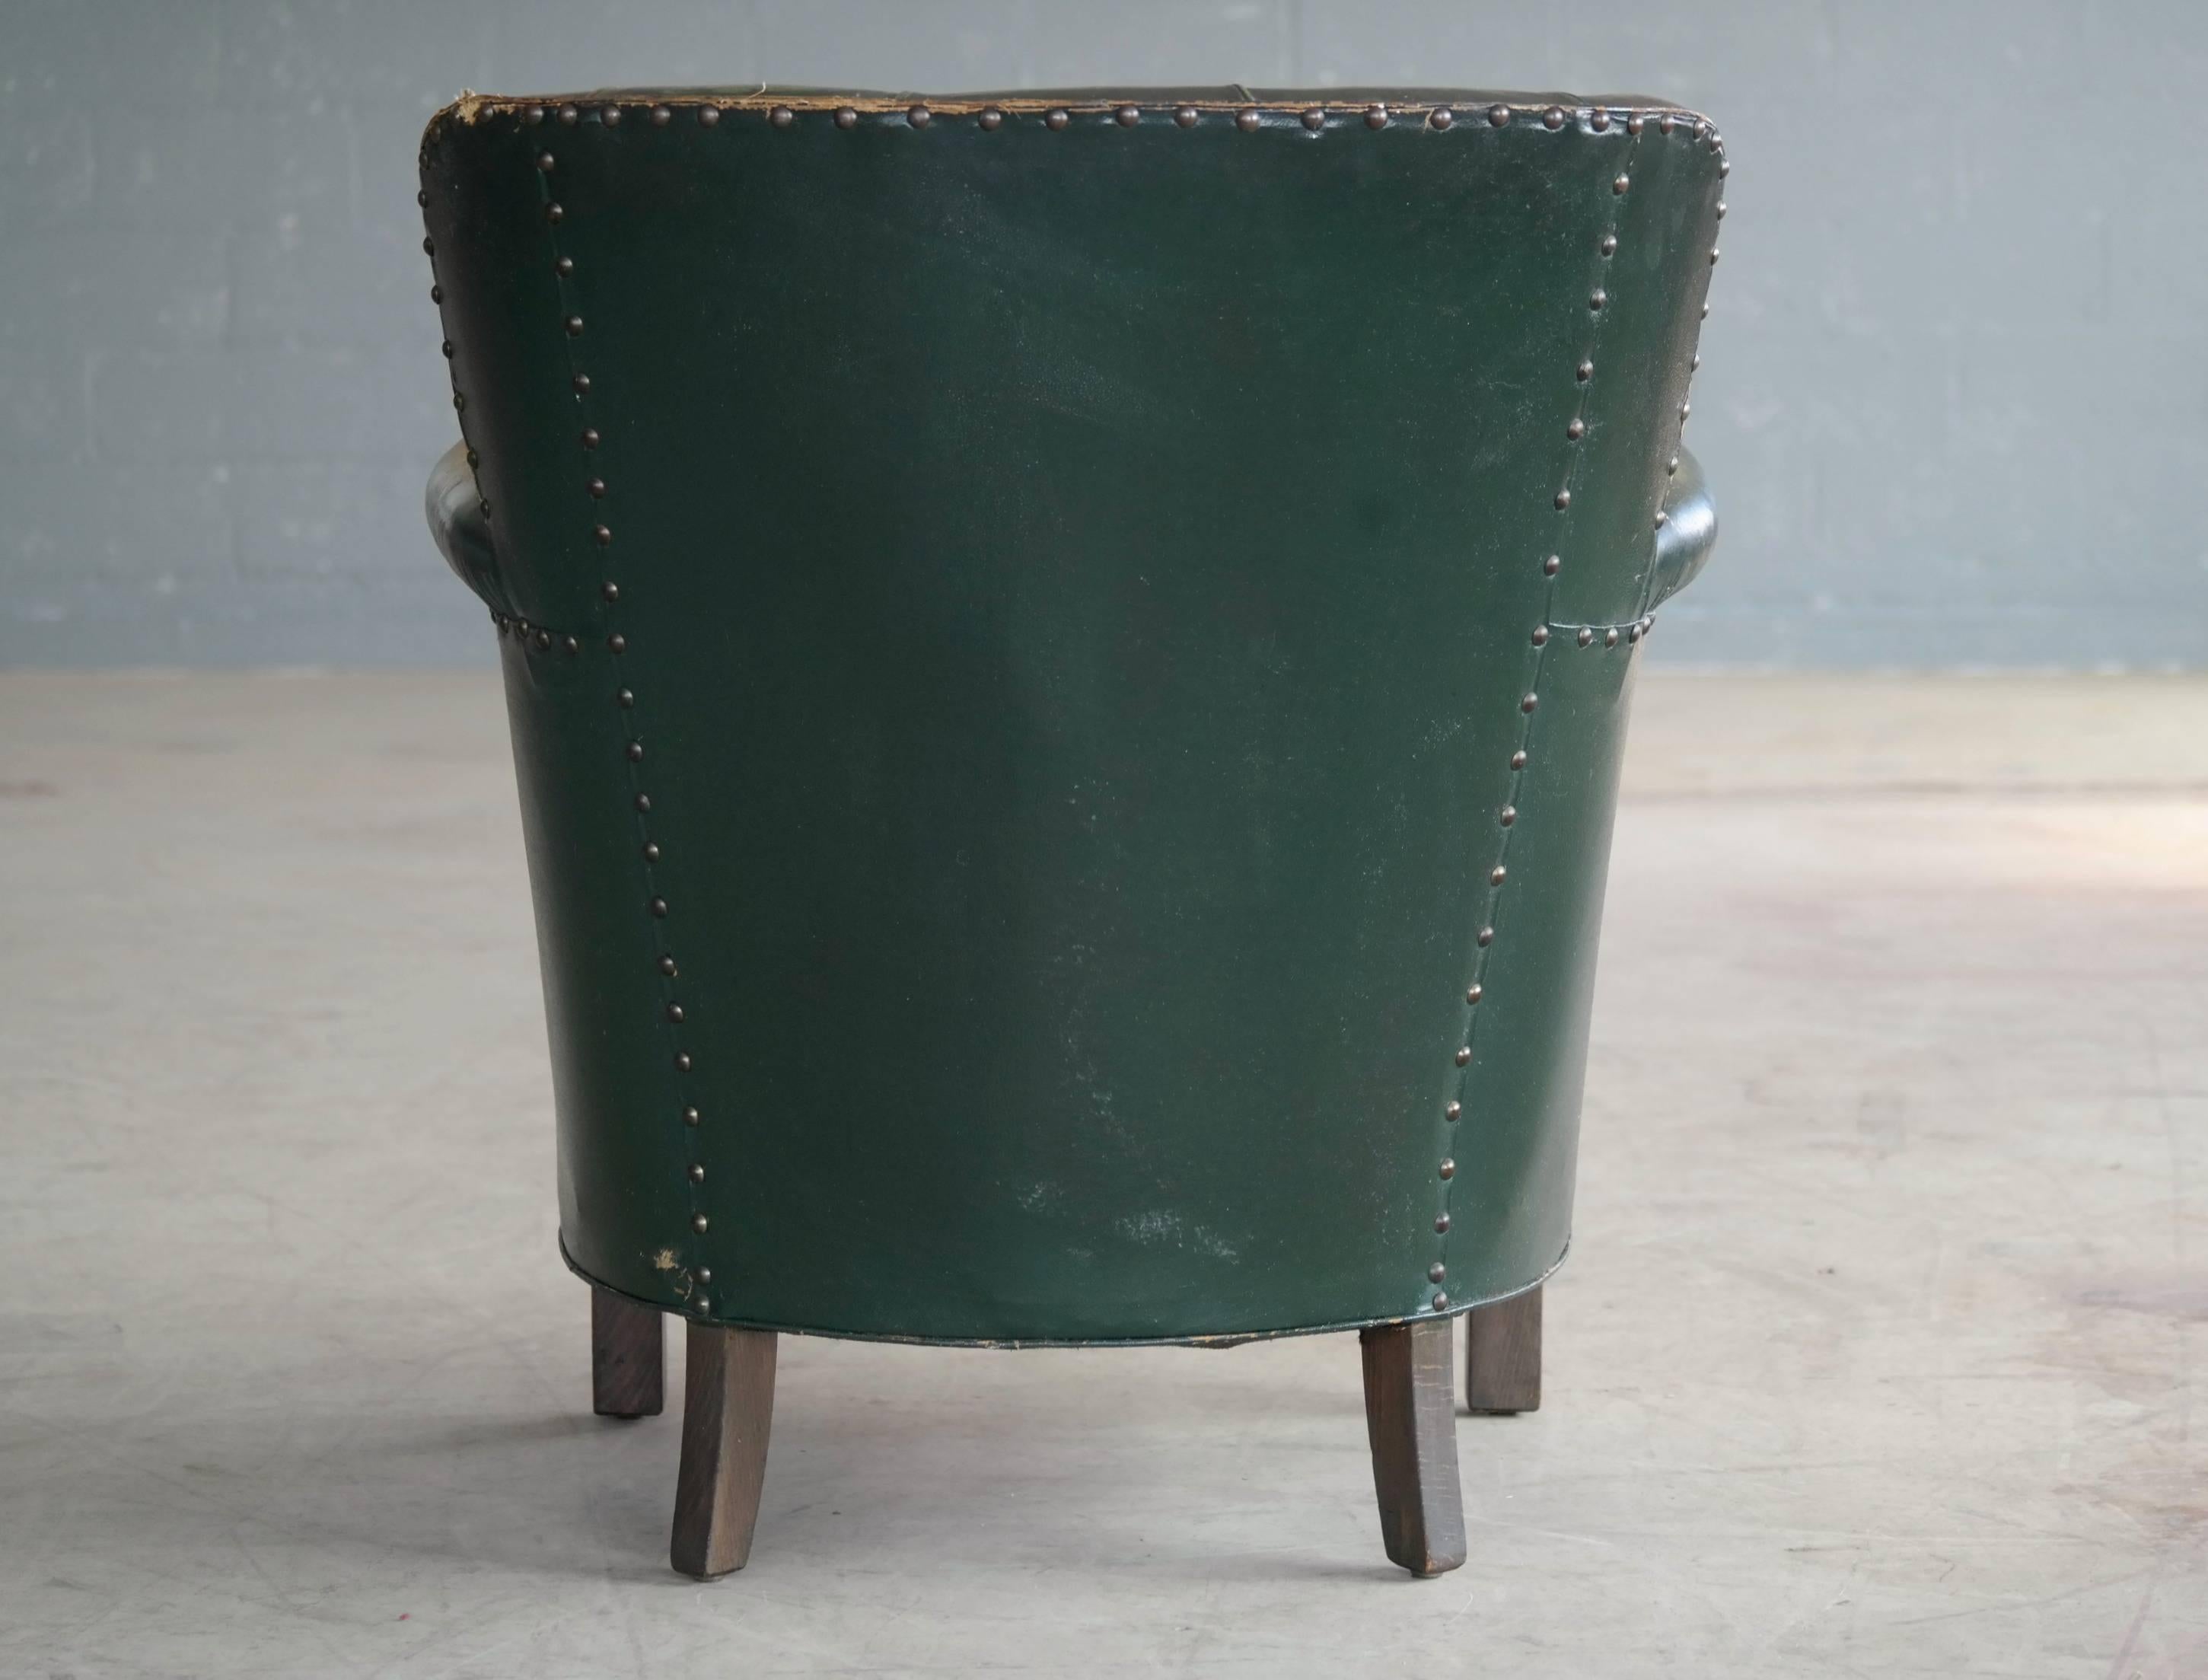 Danish 1930s Small Scale Club Chair in Tufted Patinated Green Leather 4